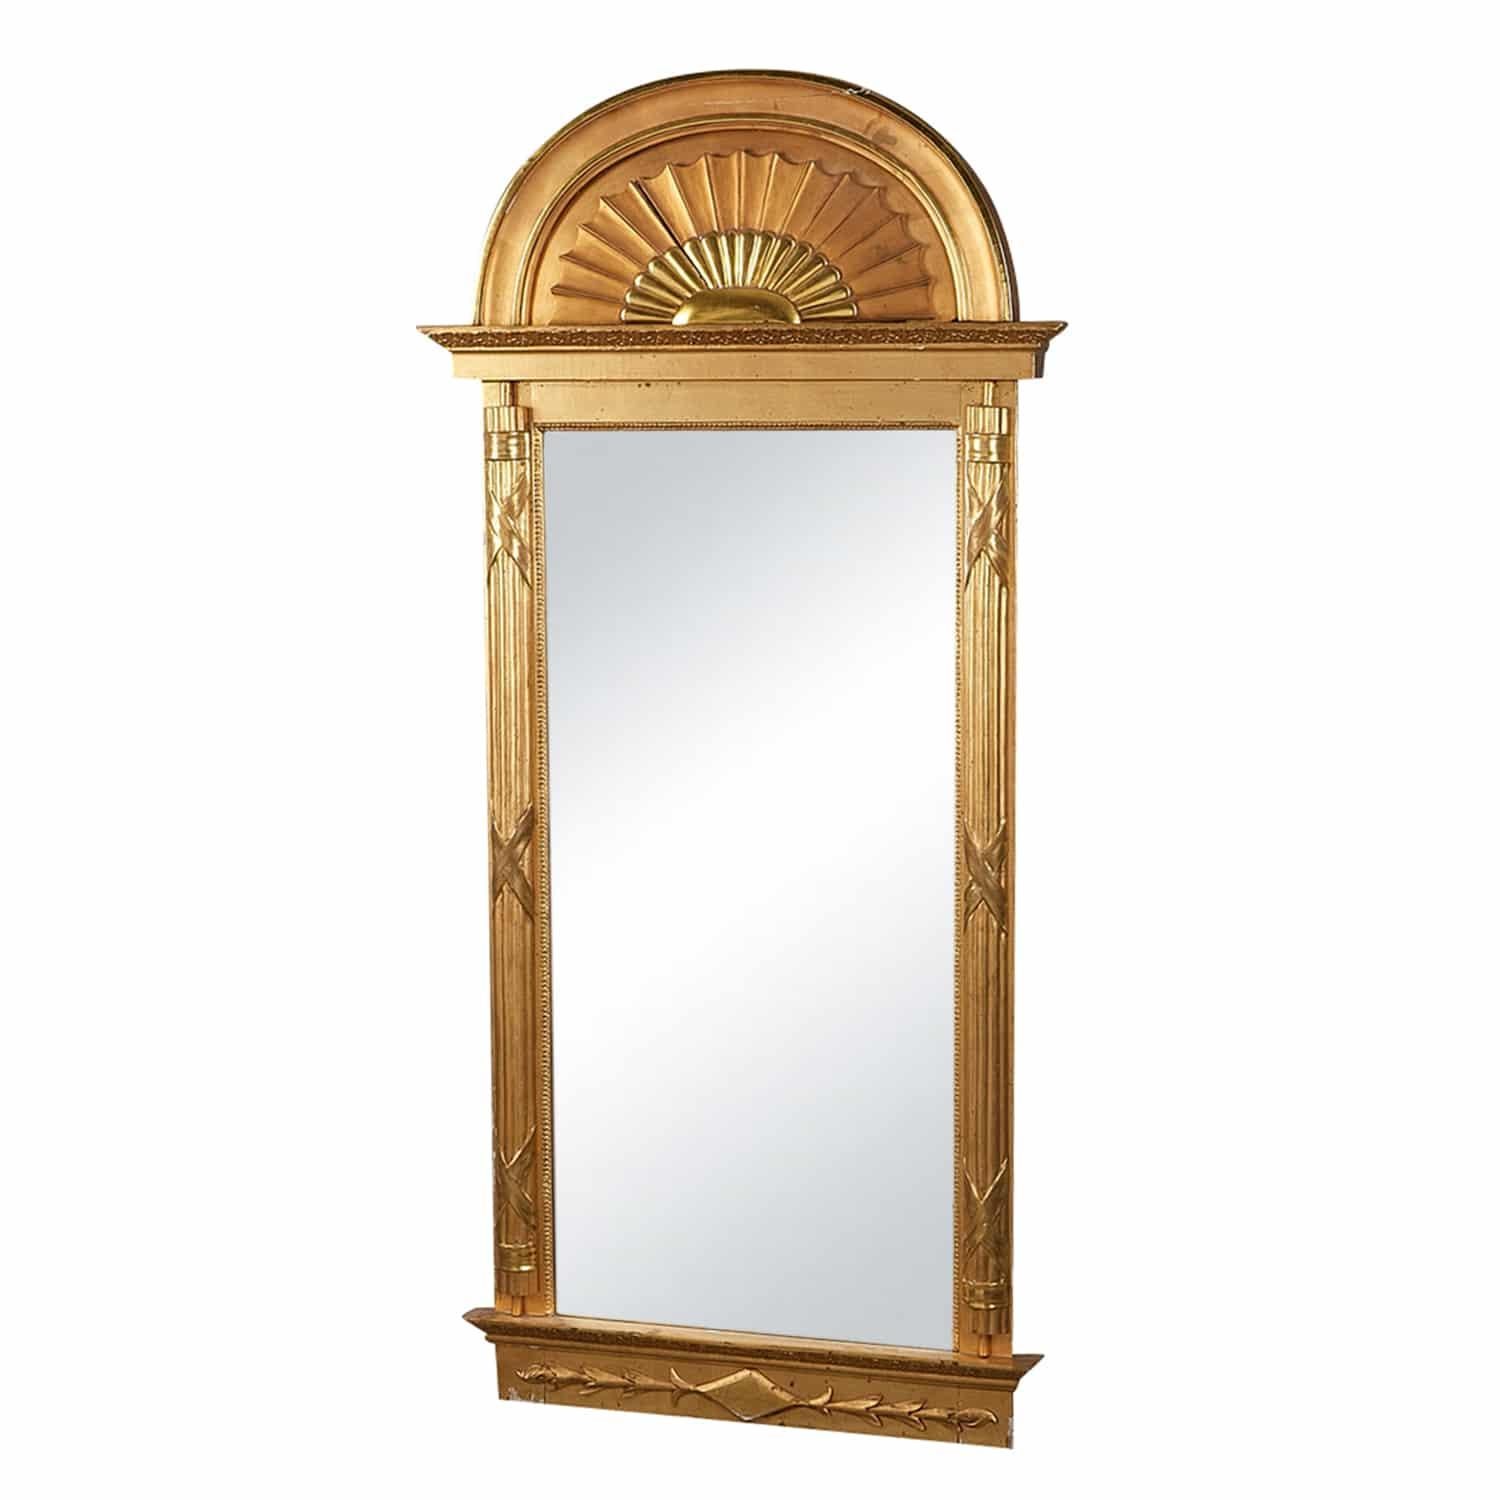 19th Century Swedish Gustavian Gilded Pine Wall Glass Mirror, Scandinavian Decor In Good Condition For Sale In West Palm Beach, FL